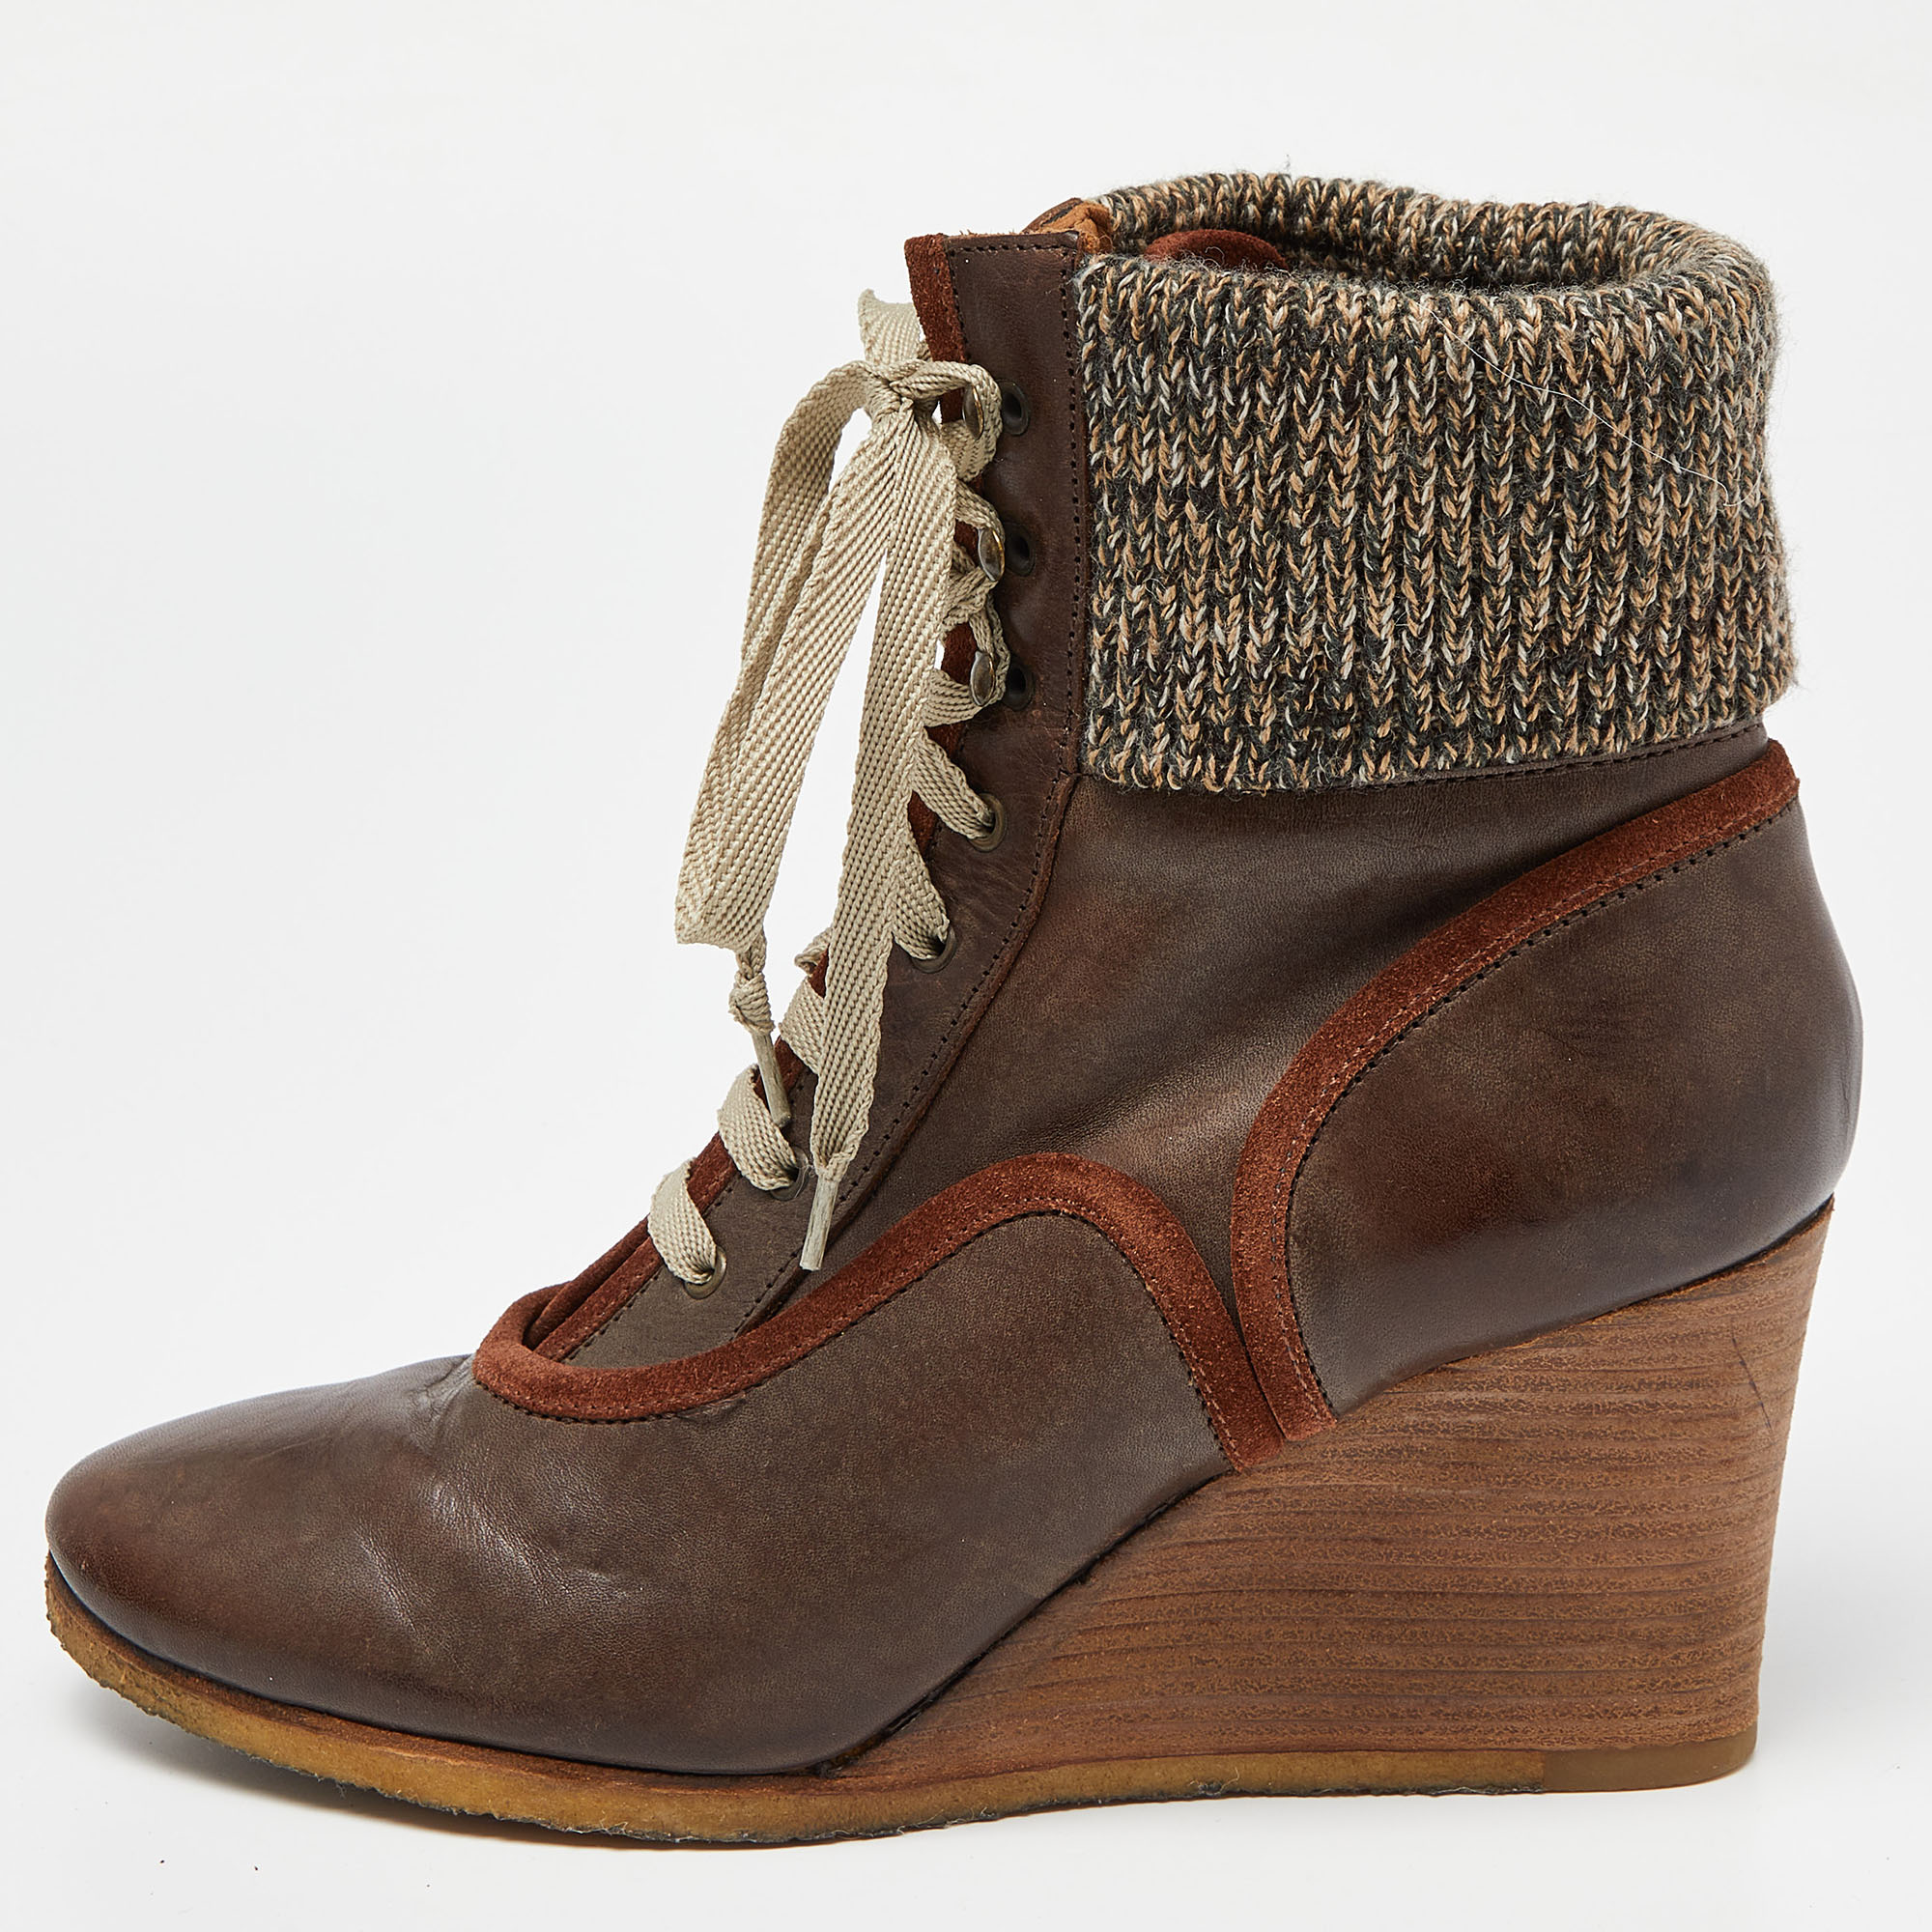 Chloe Brown Leather And Knit Fabric Wedge Ankle Boots Size 39